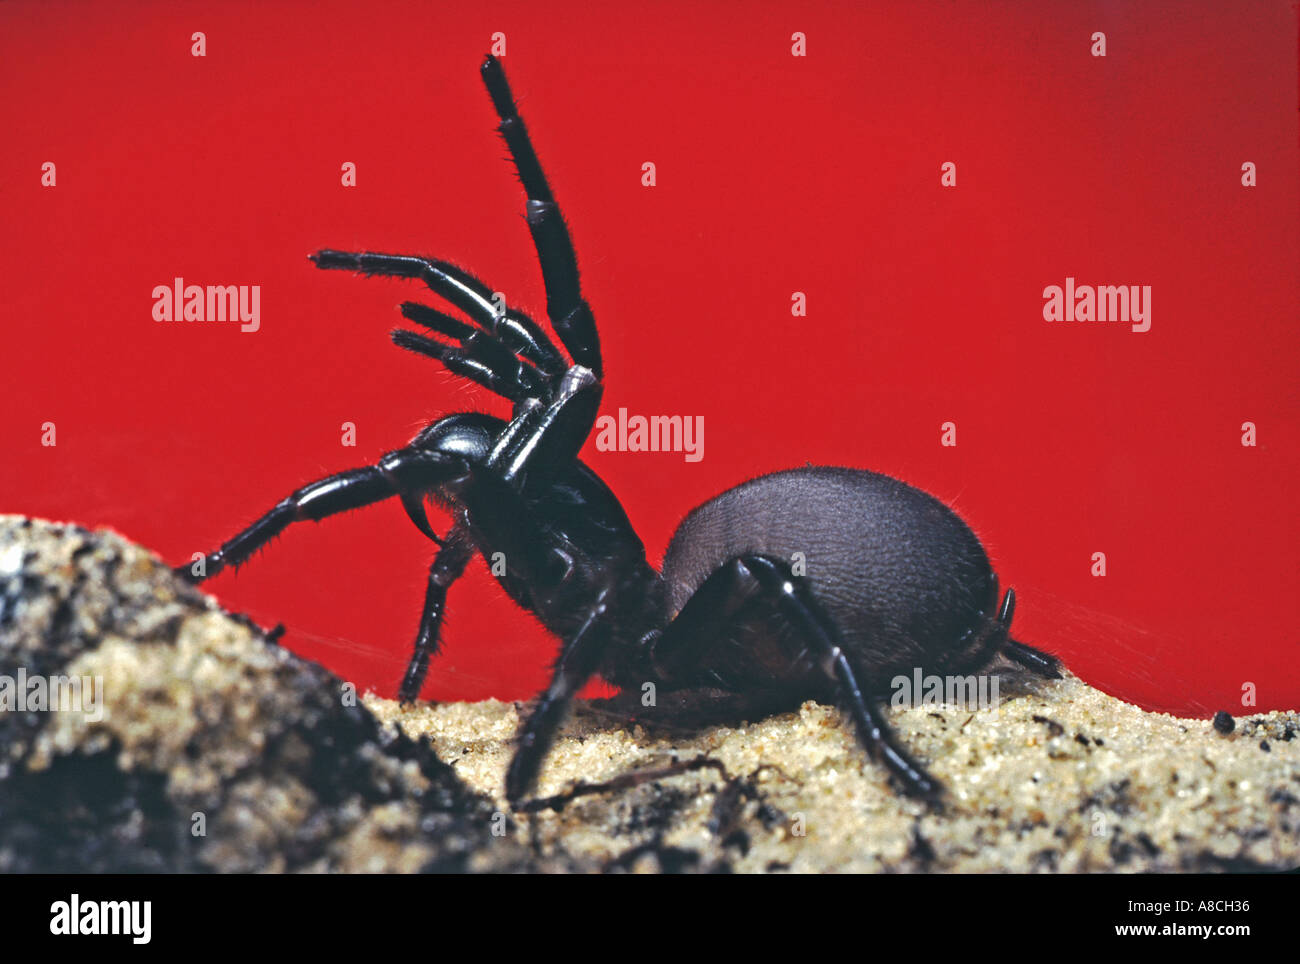 World s most poisonous spider Atrax Robustus the Sydney Funnel Web Spider Stock Photo